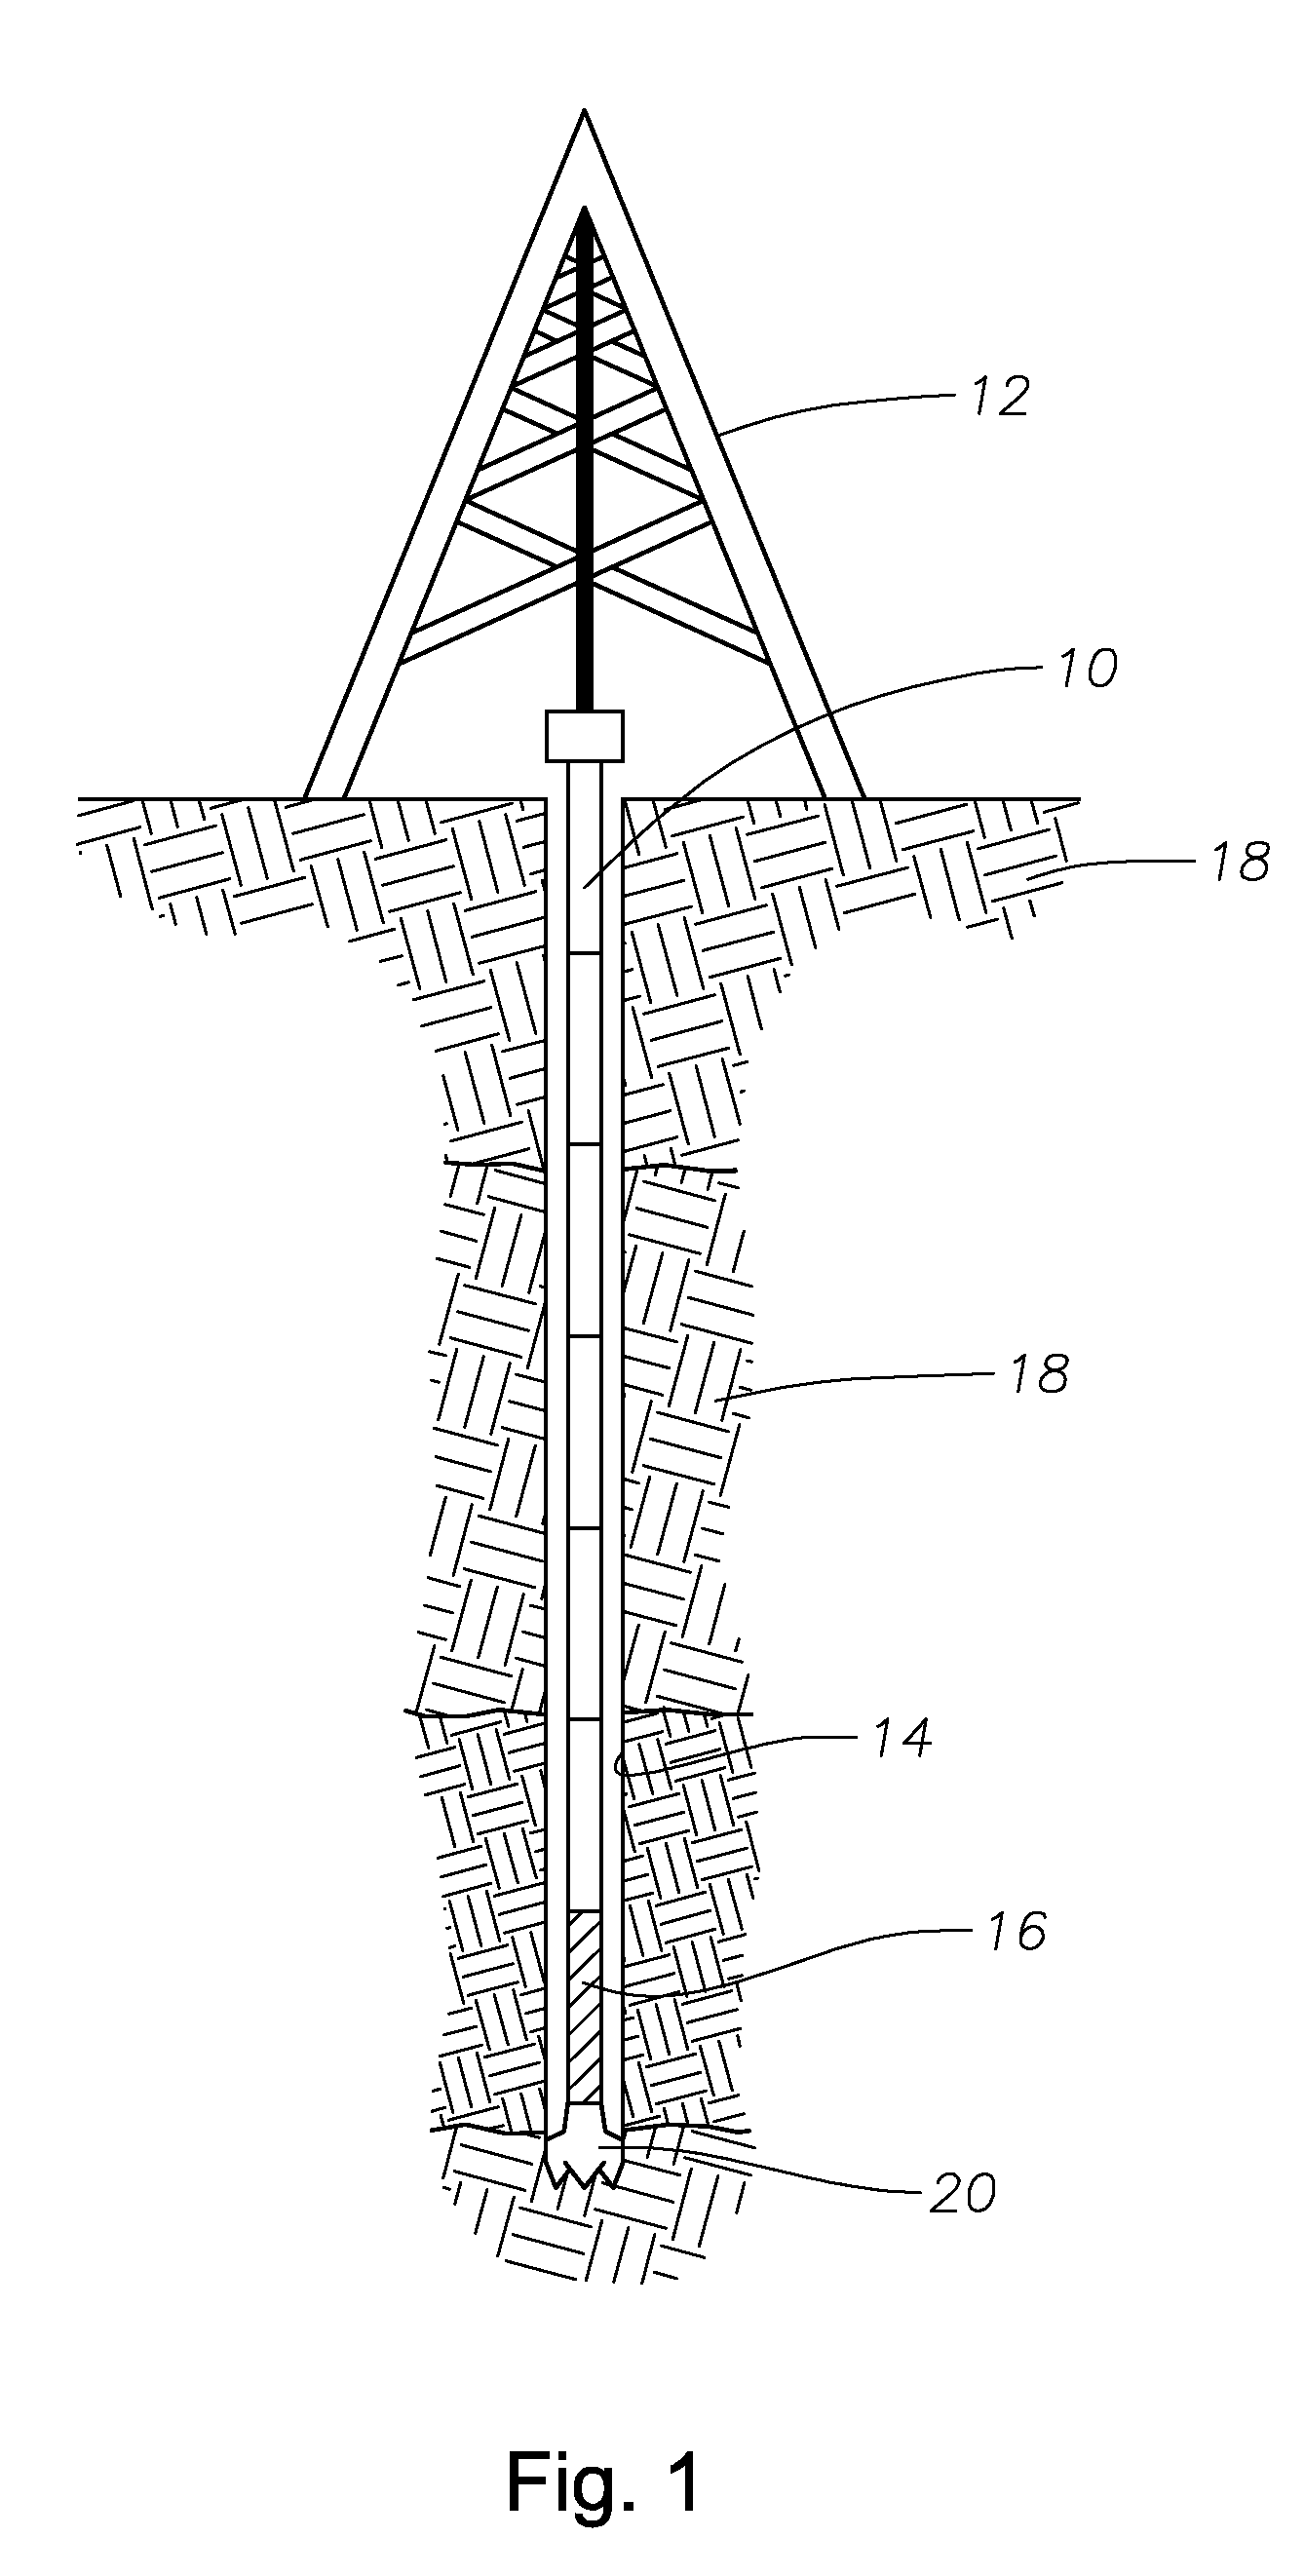 Representation of whirl in fixed cutter drill bits